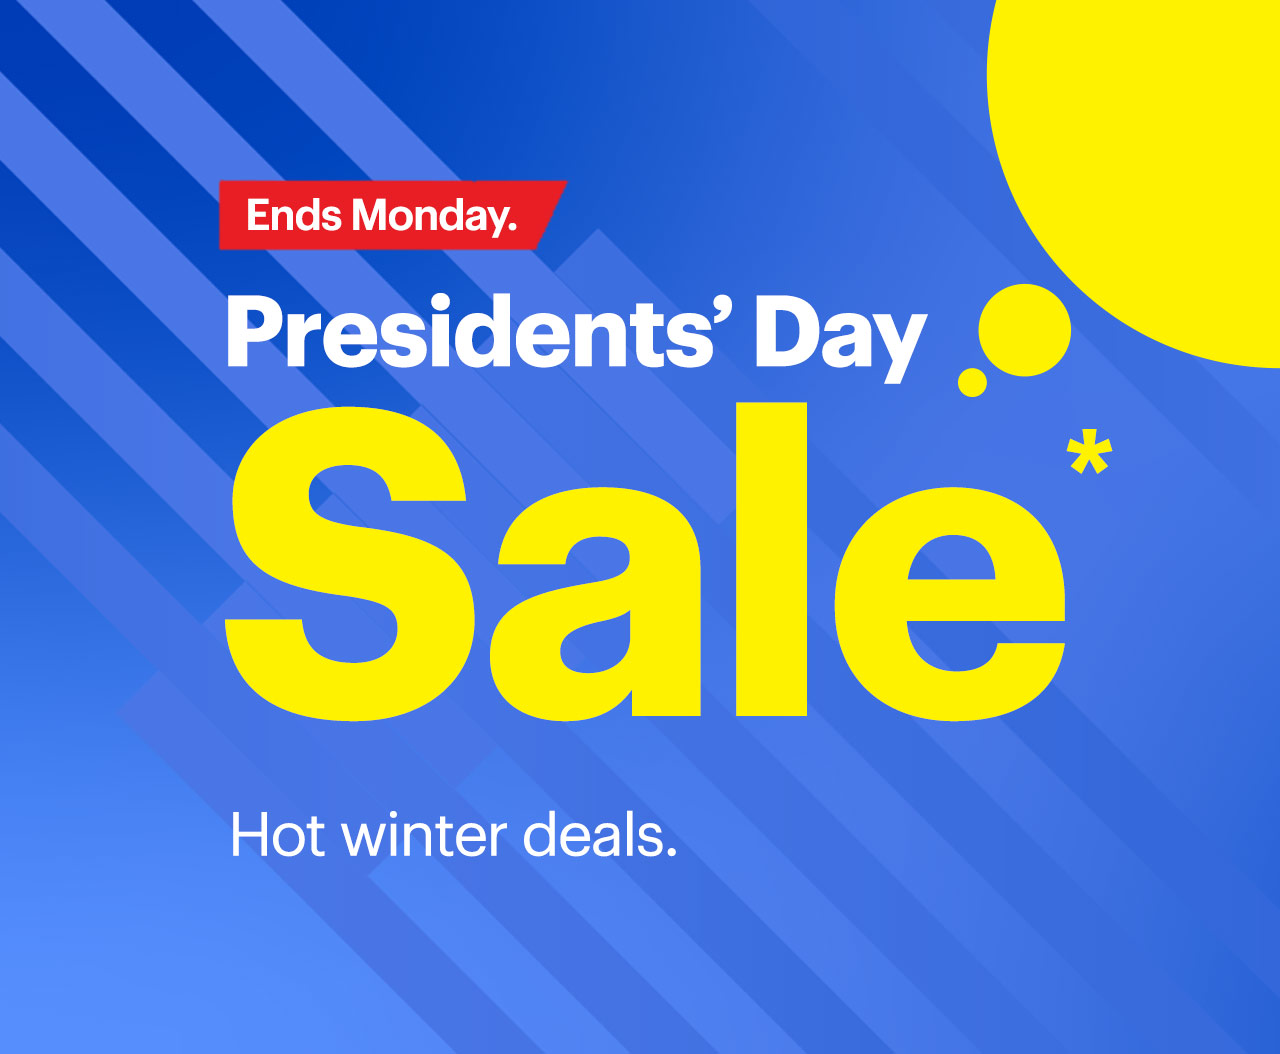 Presidents' Day Sale ends Monday. Hot winter deals. Reference disclaimer.